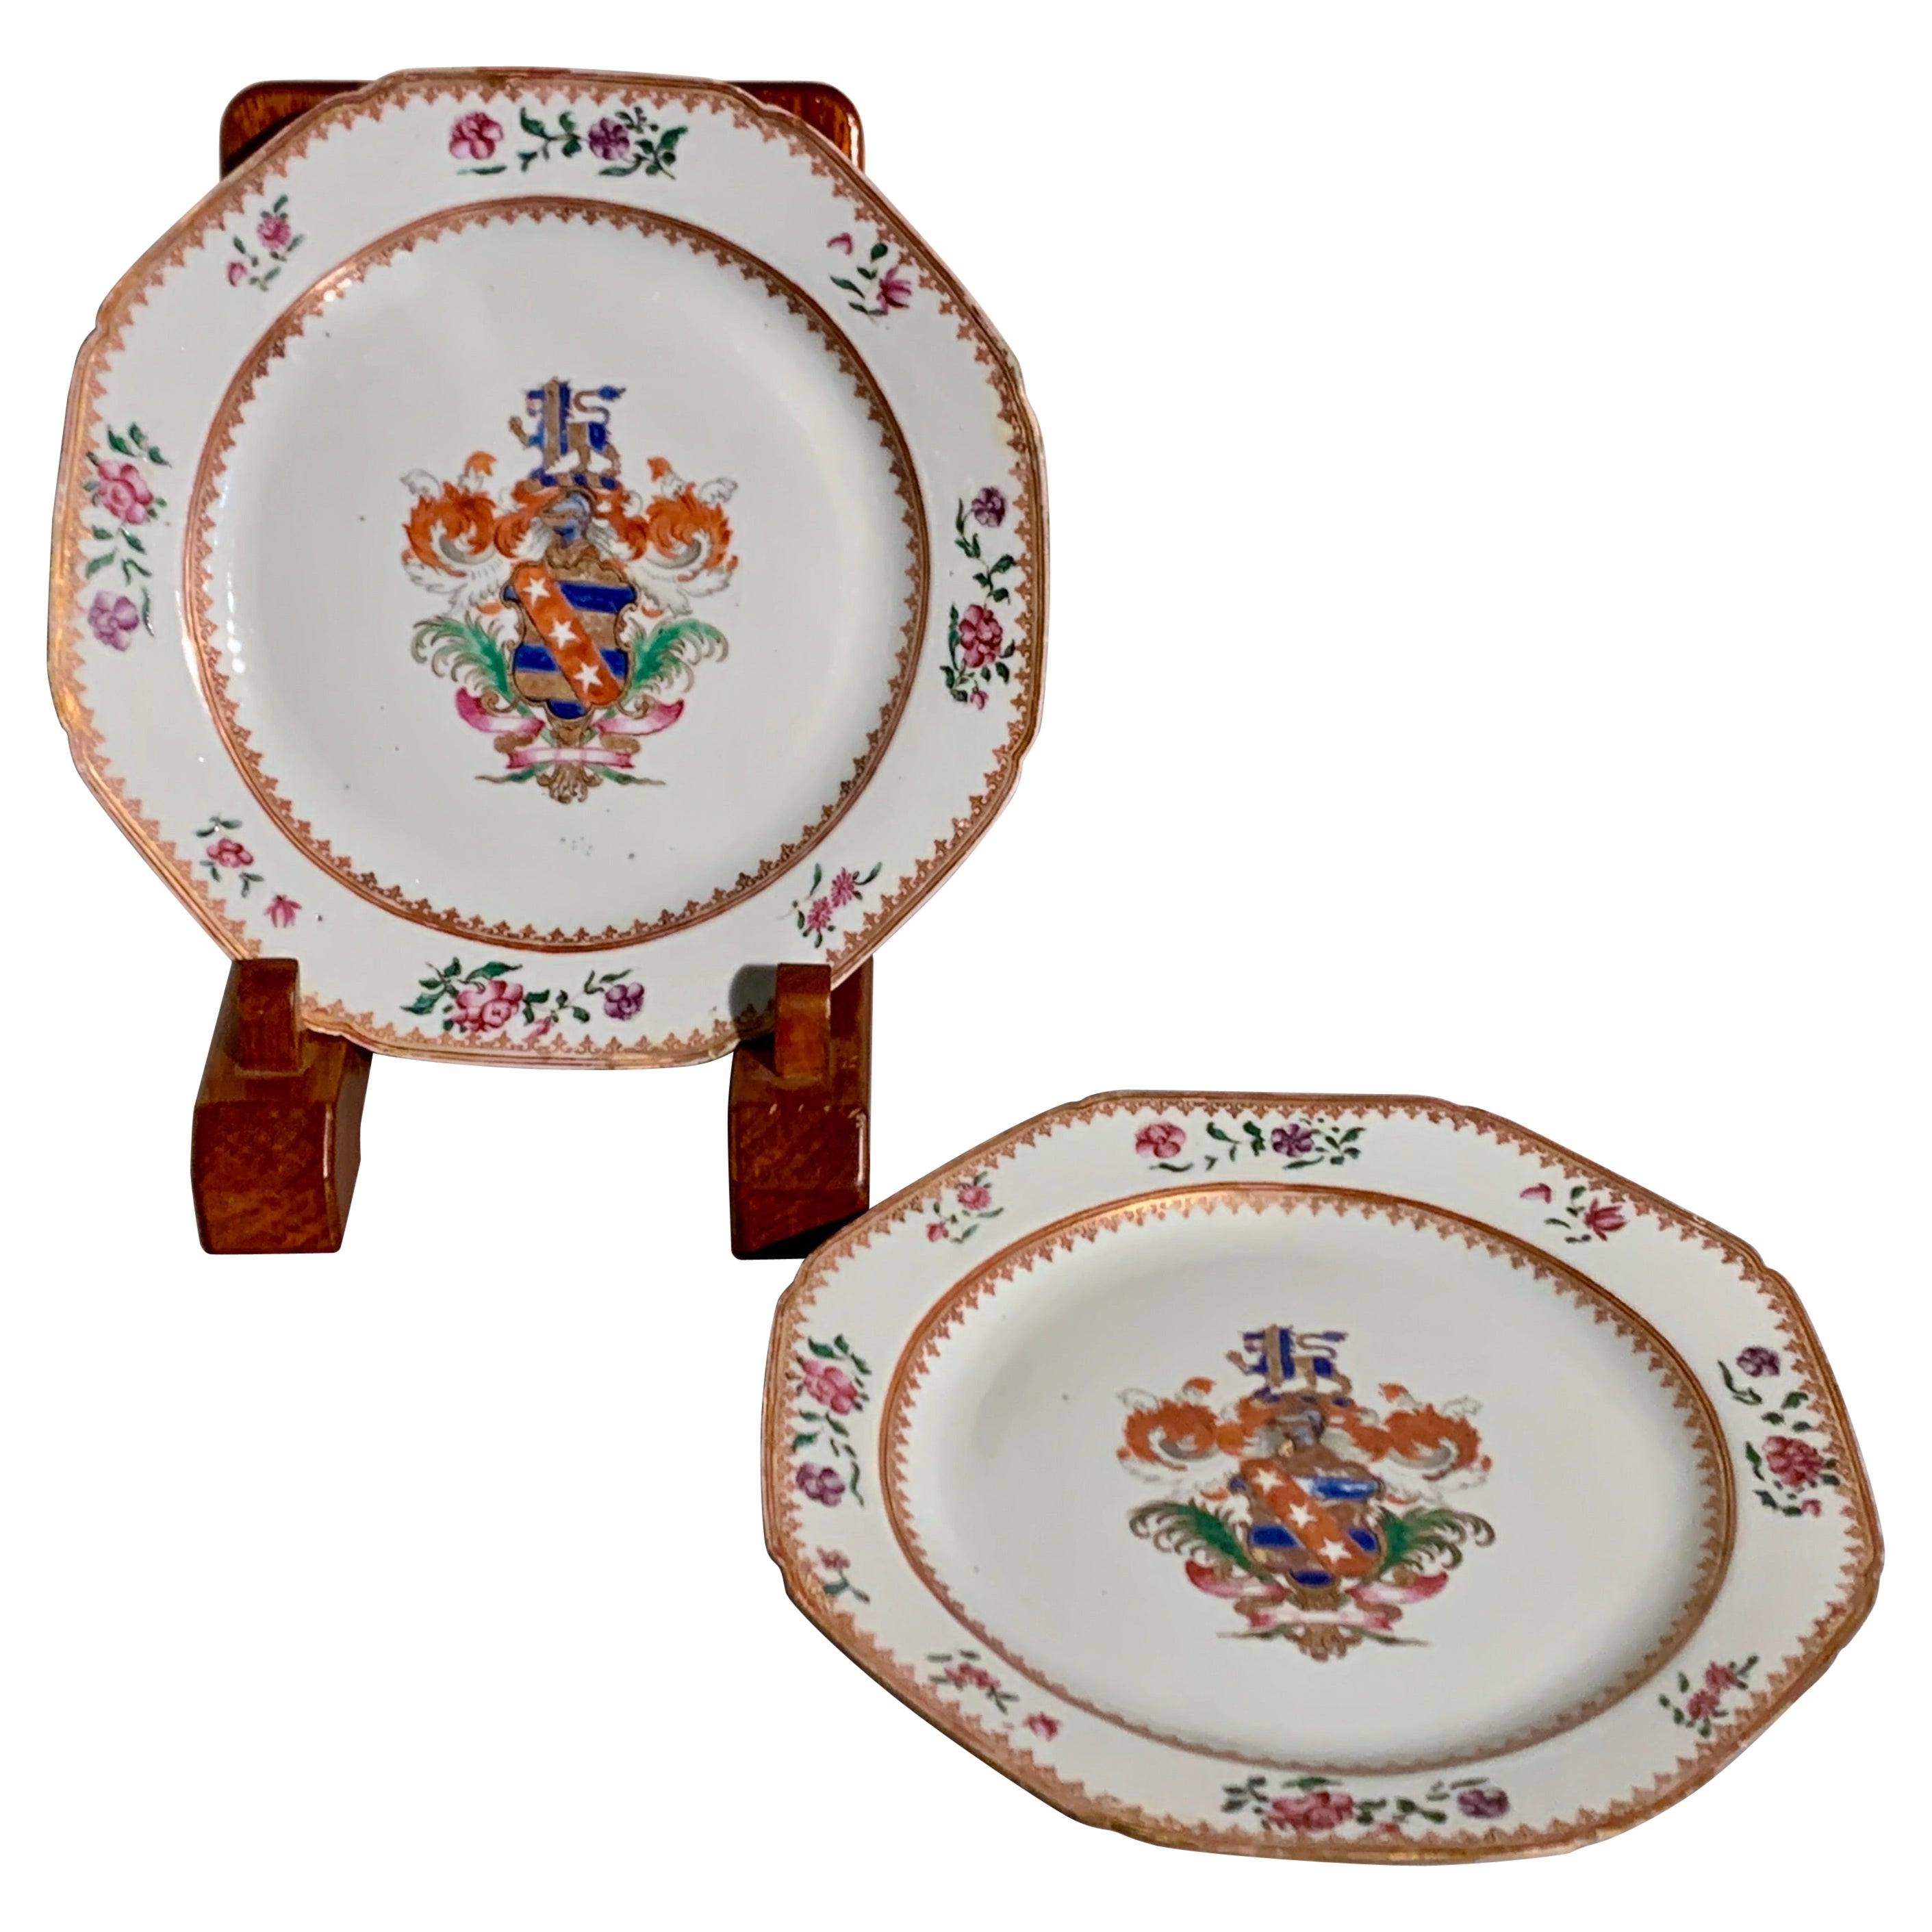 Pair Chinese Export Porcelain Permbridge Armorial Plates, mid 18th c, China For Sale